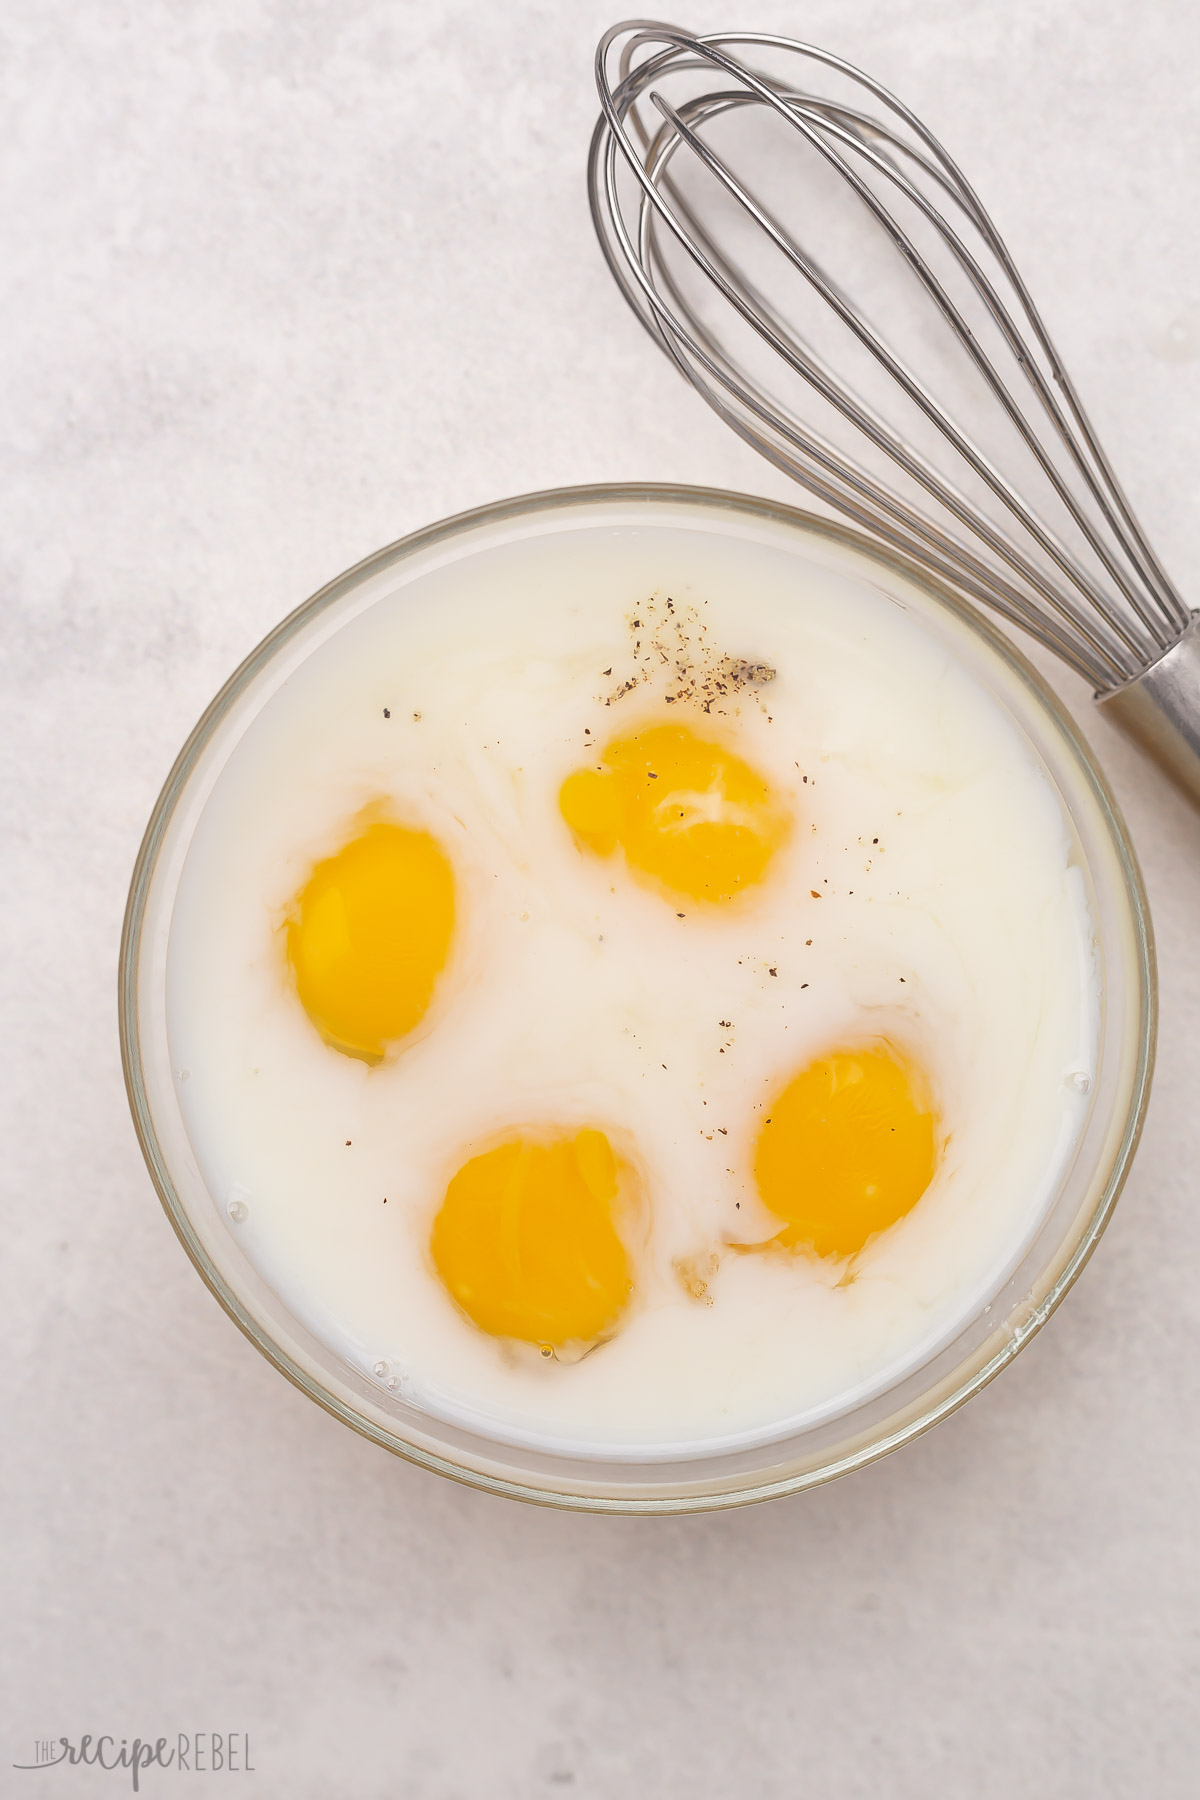 Top view of glass bowl with eggs, salt, pepper, and milk in it unmixed with a whisk beside it.